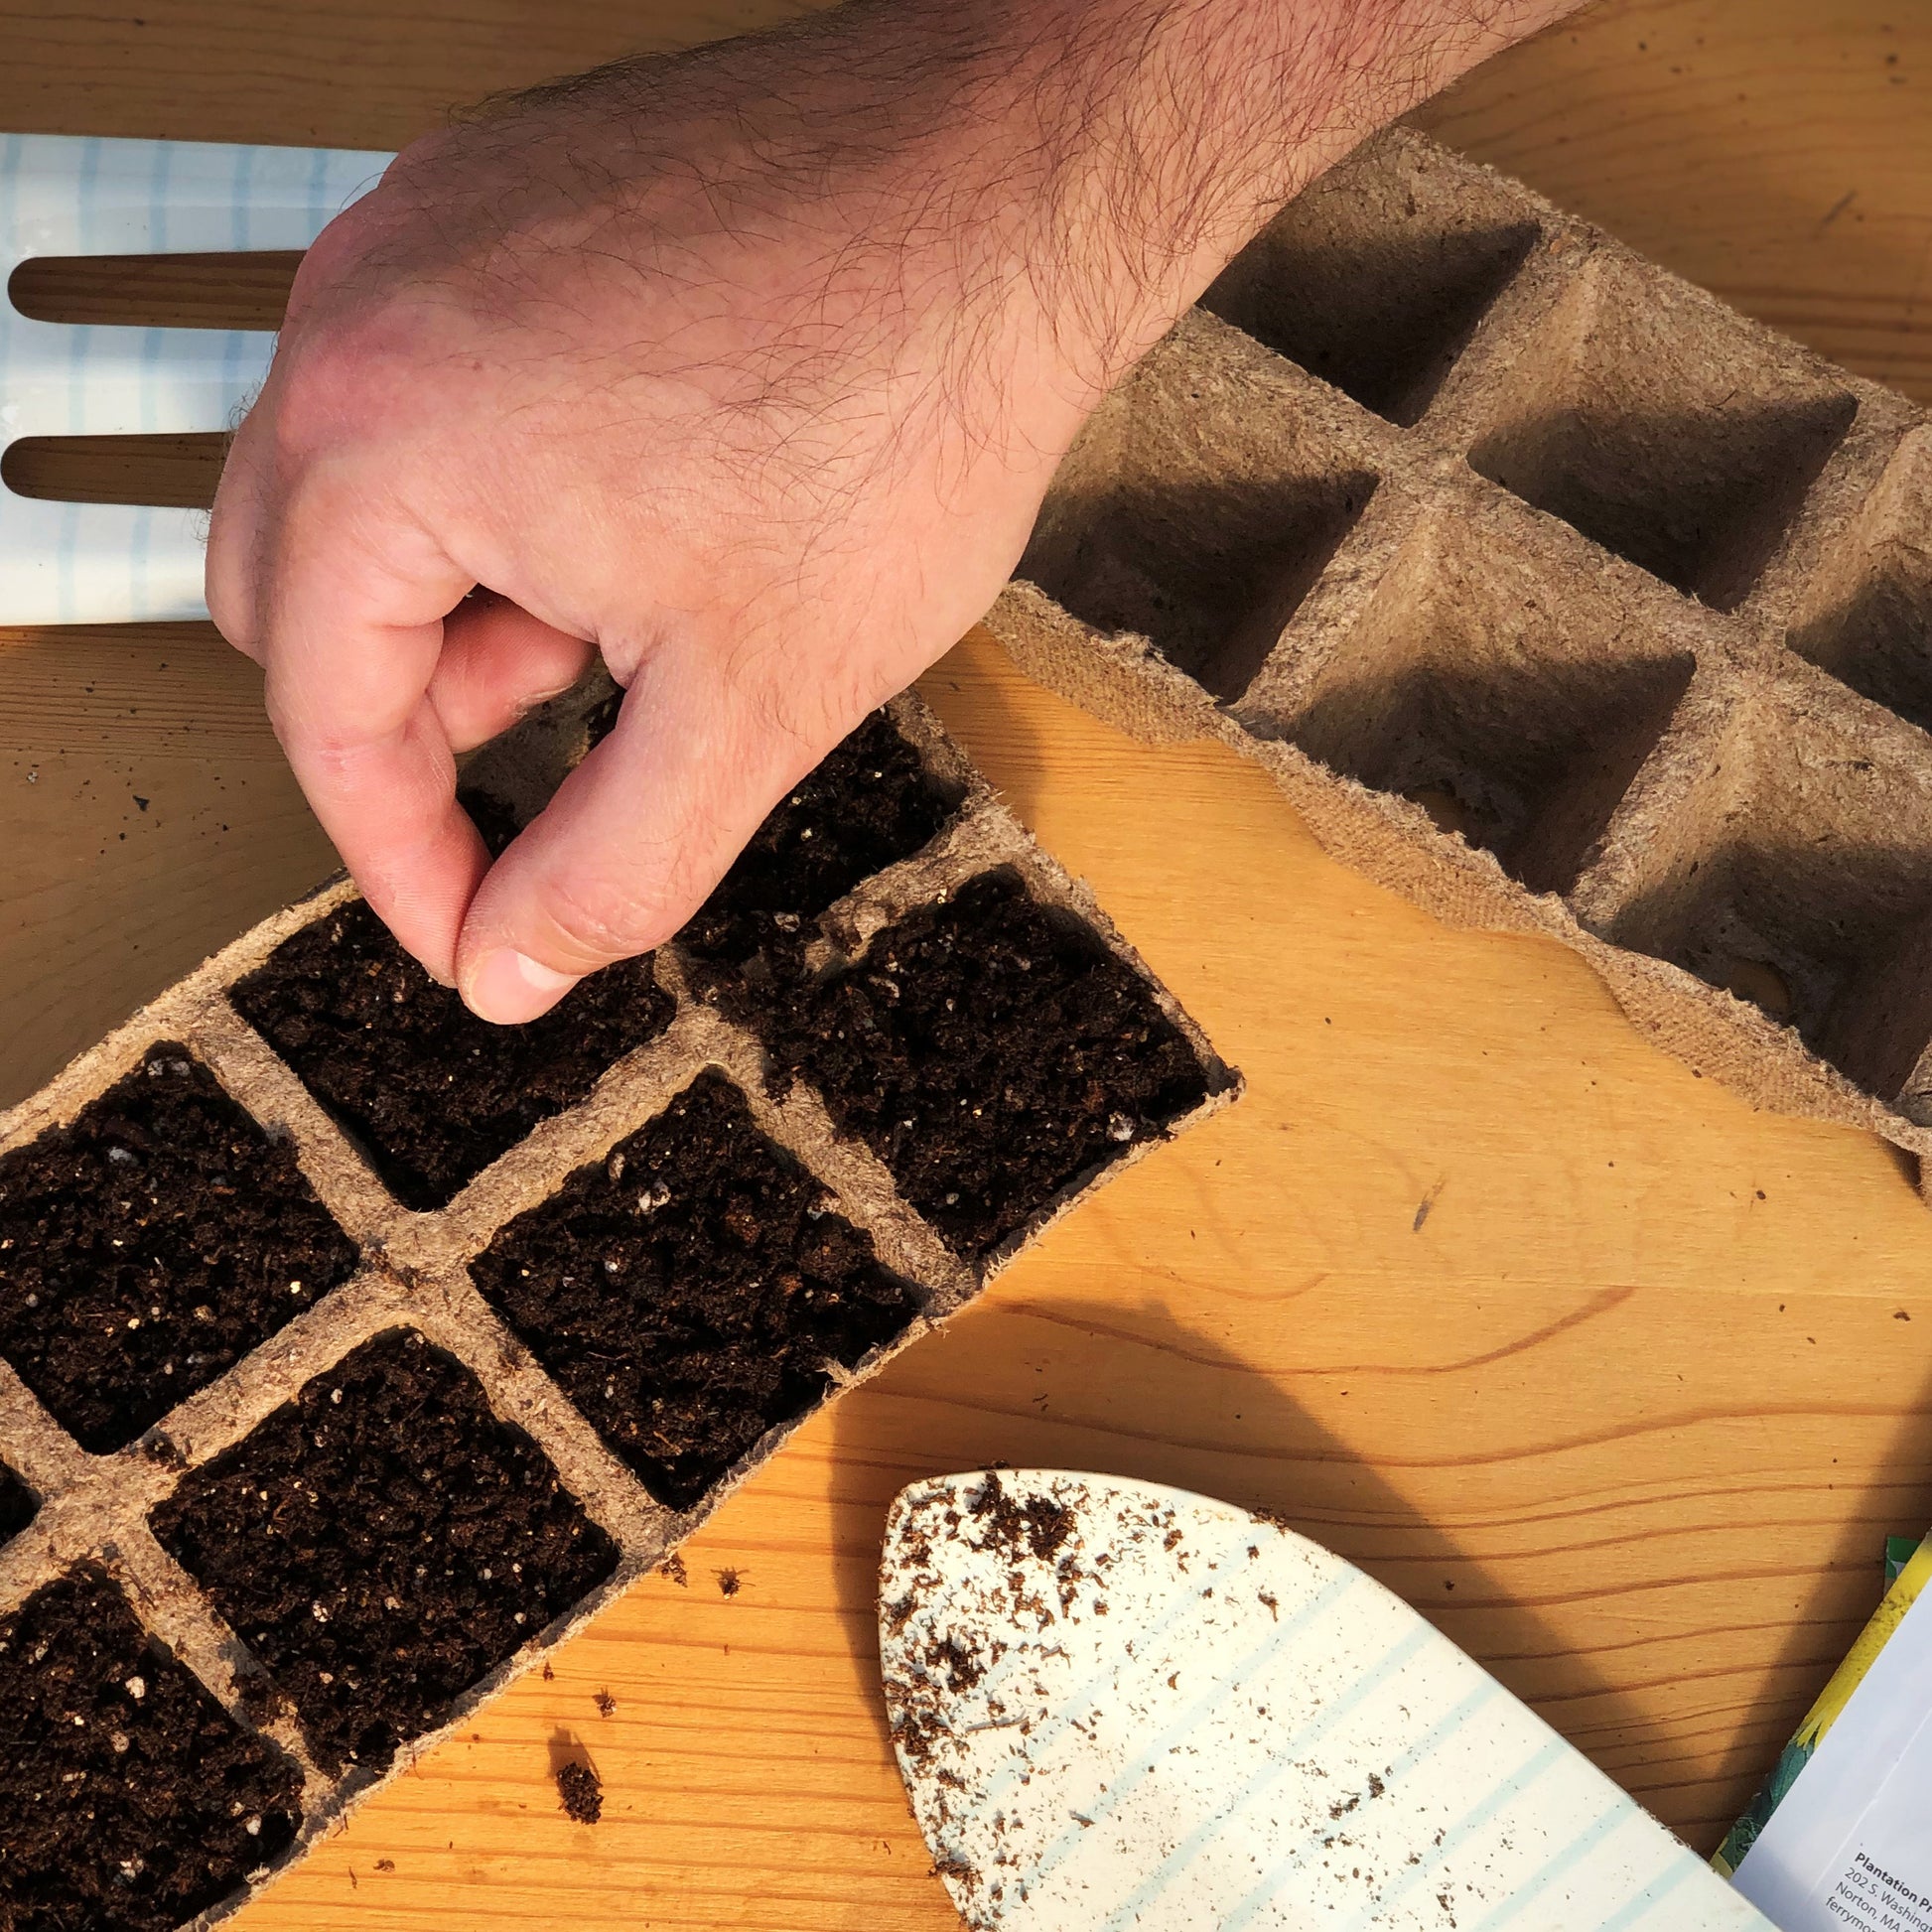 Plant your American Flag Leek seeds into biodegradable peat strip trays filled with seed starting mix.